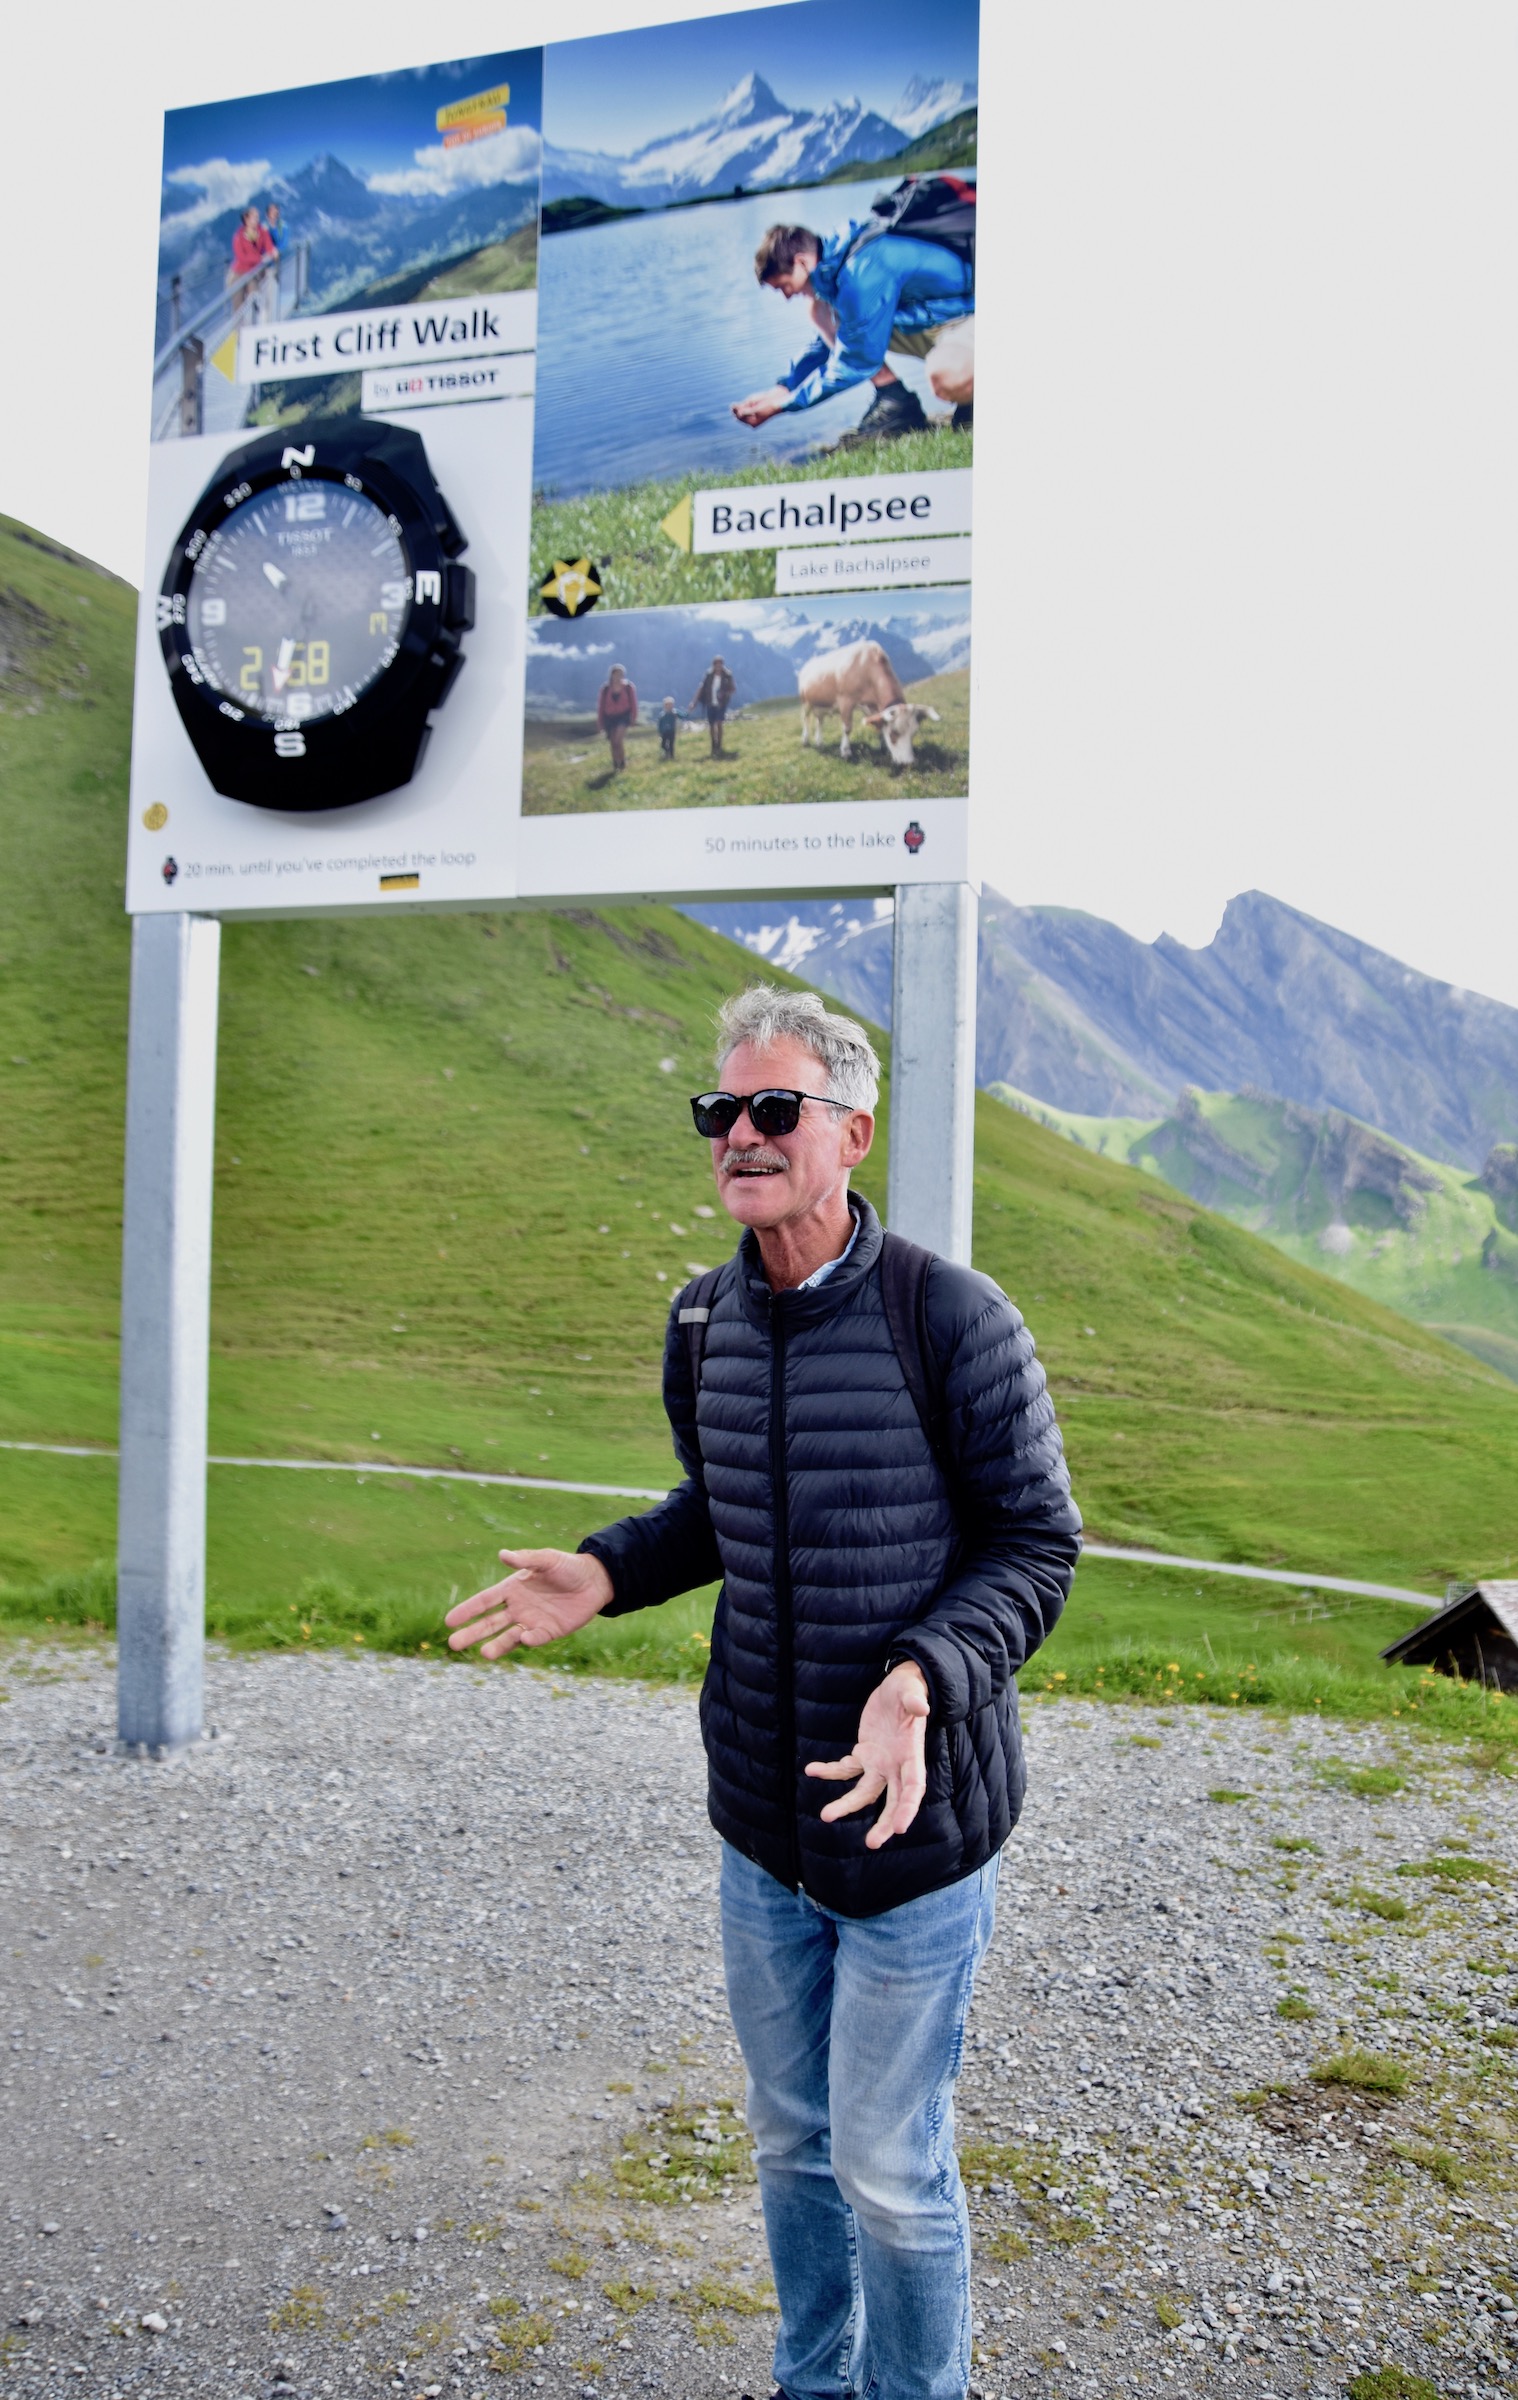 Victor Explains the Options atop Grindelwald-First Gondola